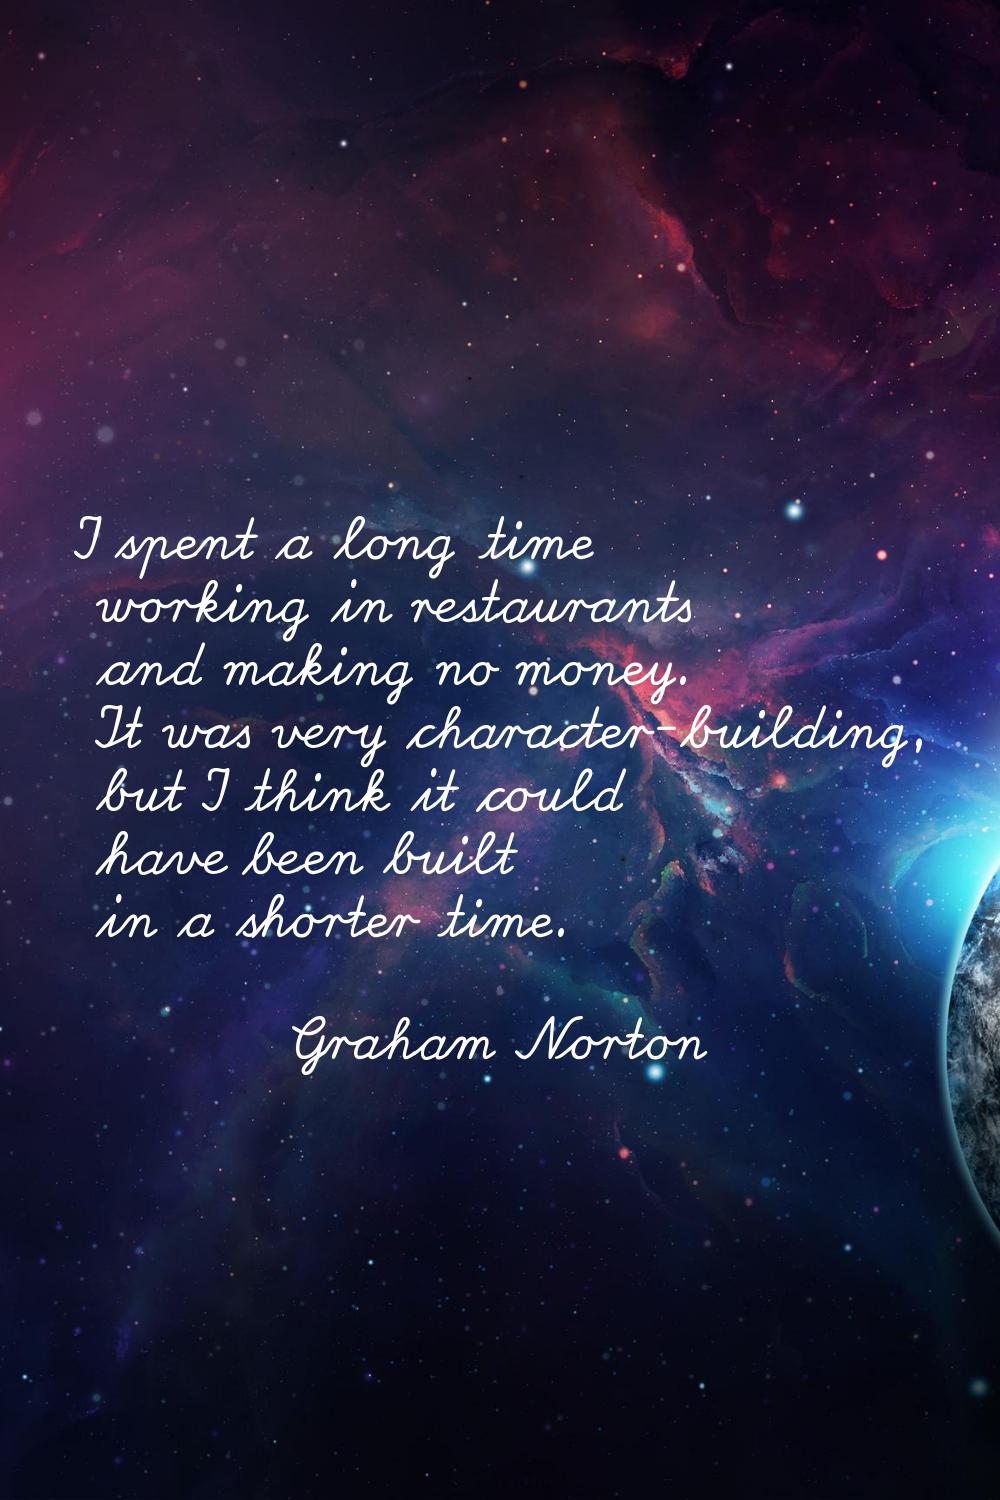 I spent a long time working in restaurants and making no money. It was very character-building, but